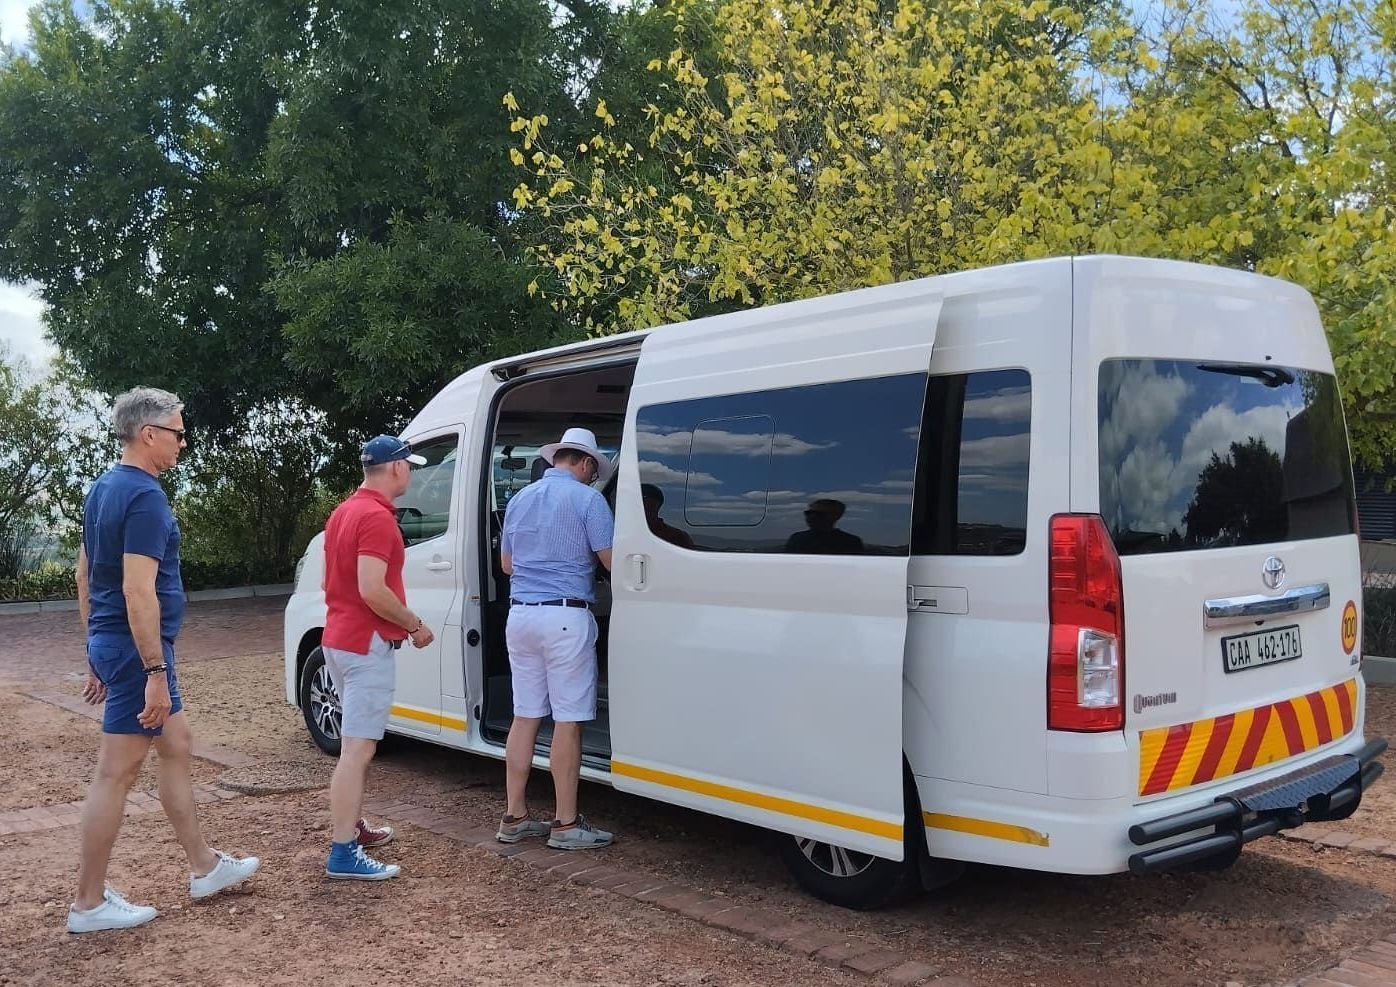 A group of men are standing next to a white van.